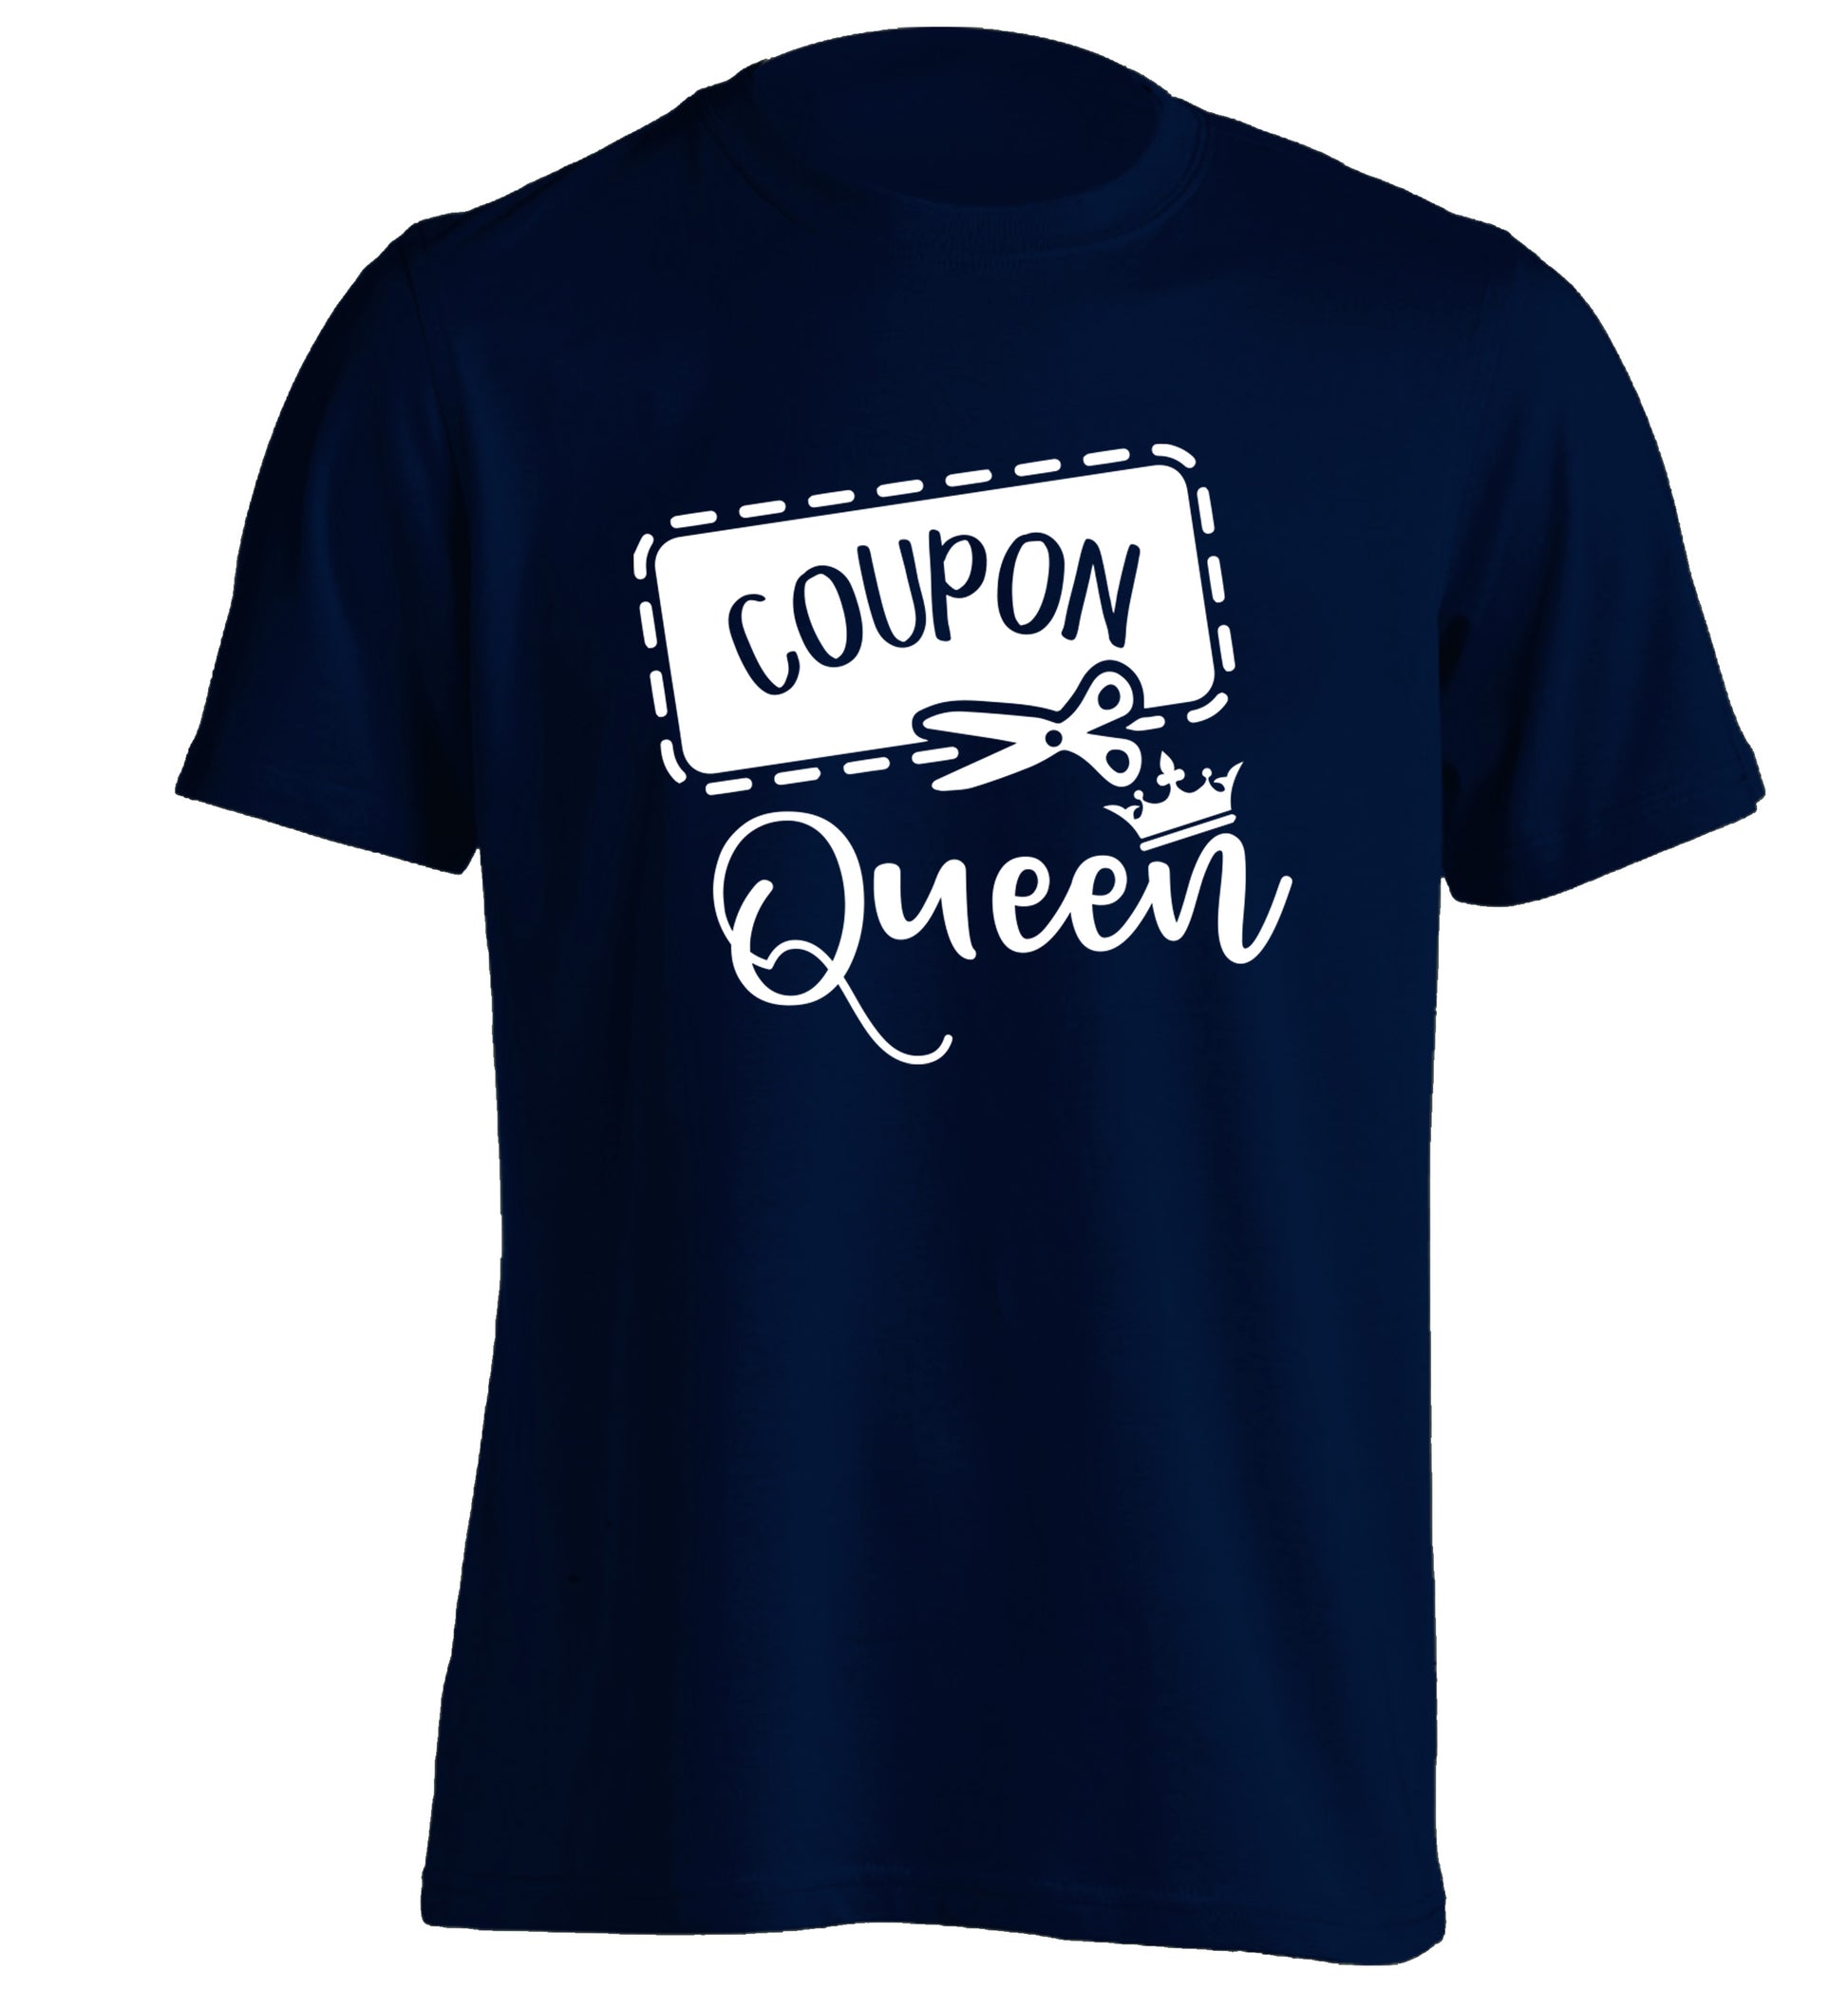 Coupon Queen adults unisex navy Tshirt 2XL